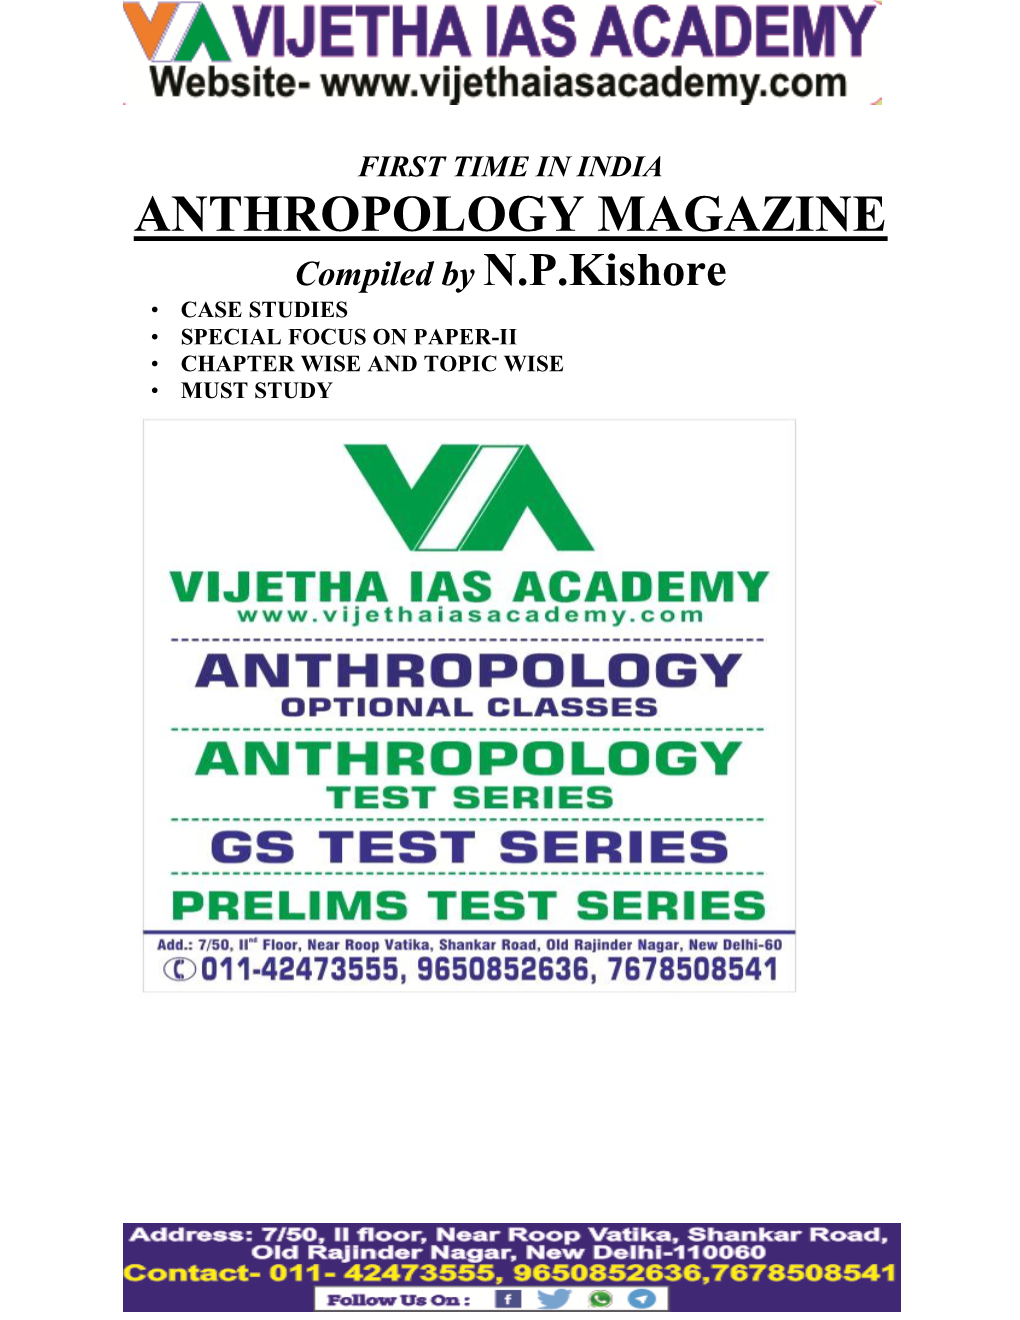 ANTHROPOLOGY MAGAZINE Compiled by N.P.Kishore • CASE STUDIES • SPECIAL FOCUS on PAPER-II • CHAPTER WISE and TOPIC WISE • MUST STUDY